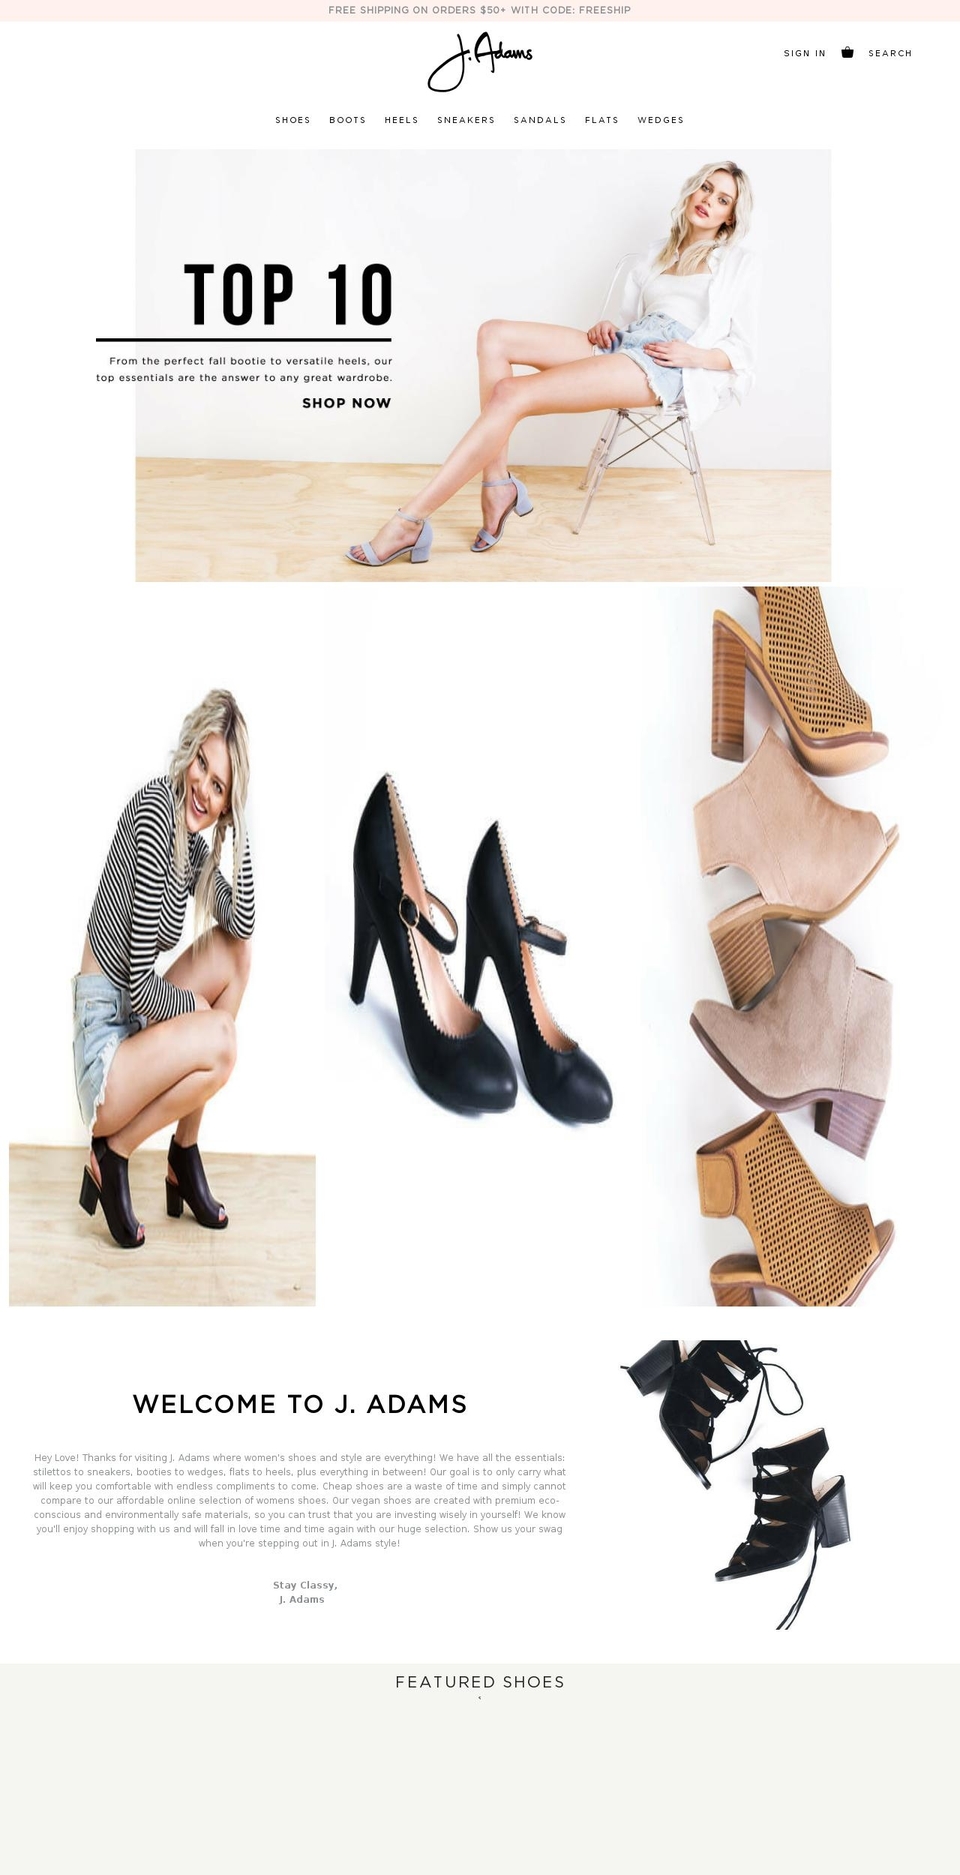 Reformation Shopify theme site example jadamsshoes.com